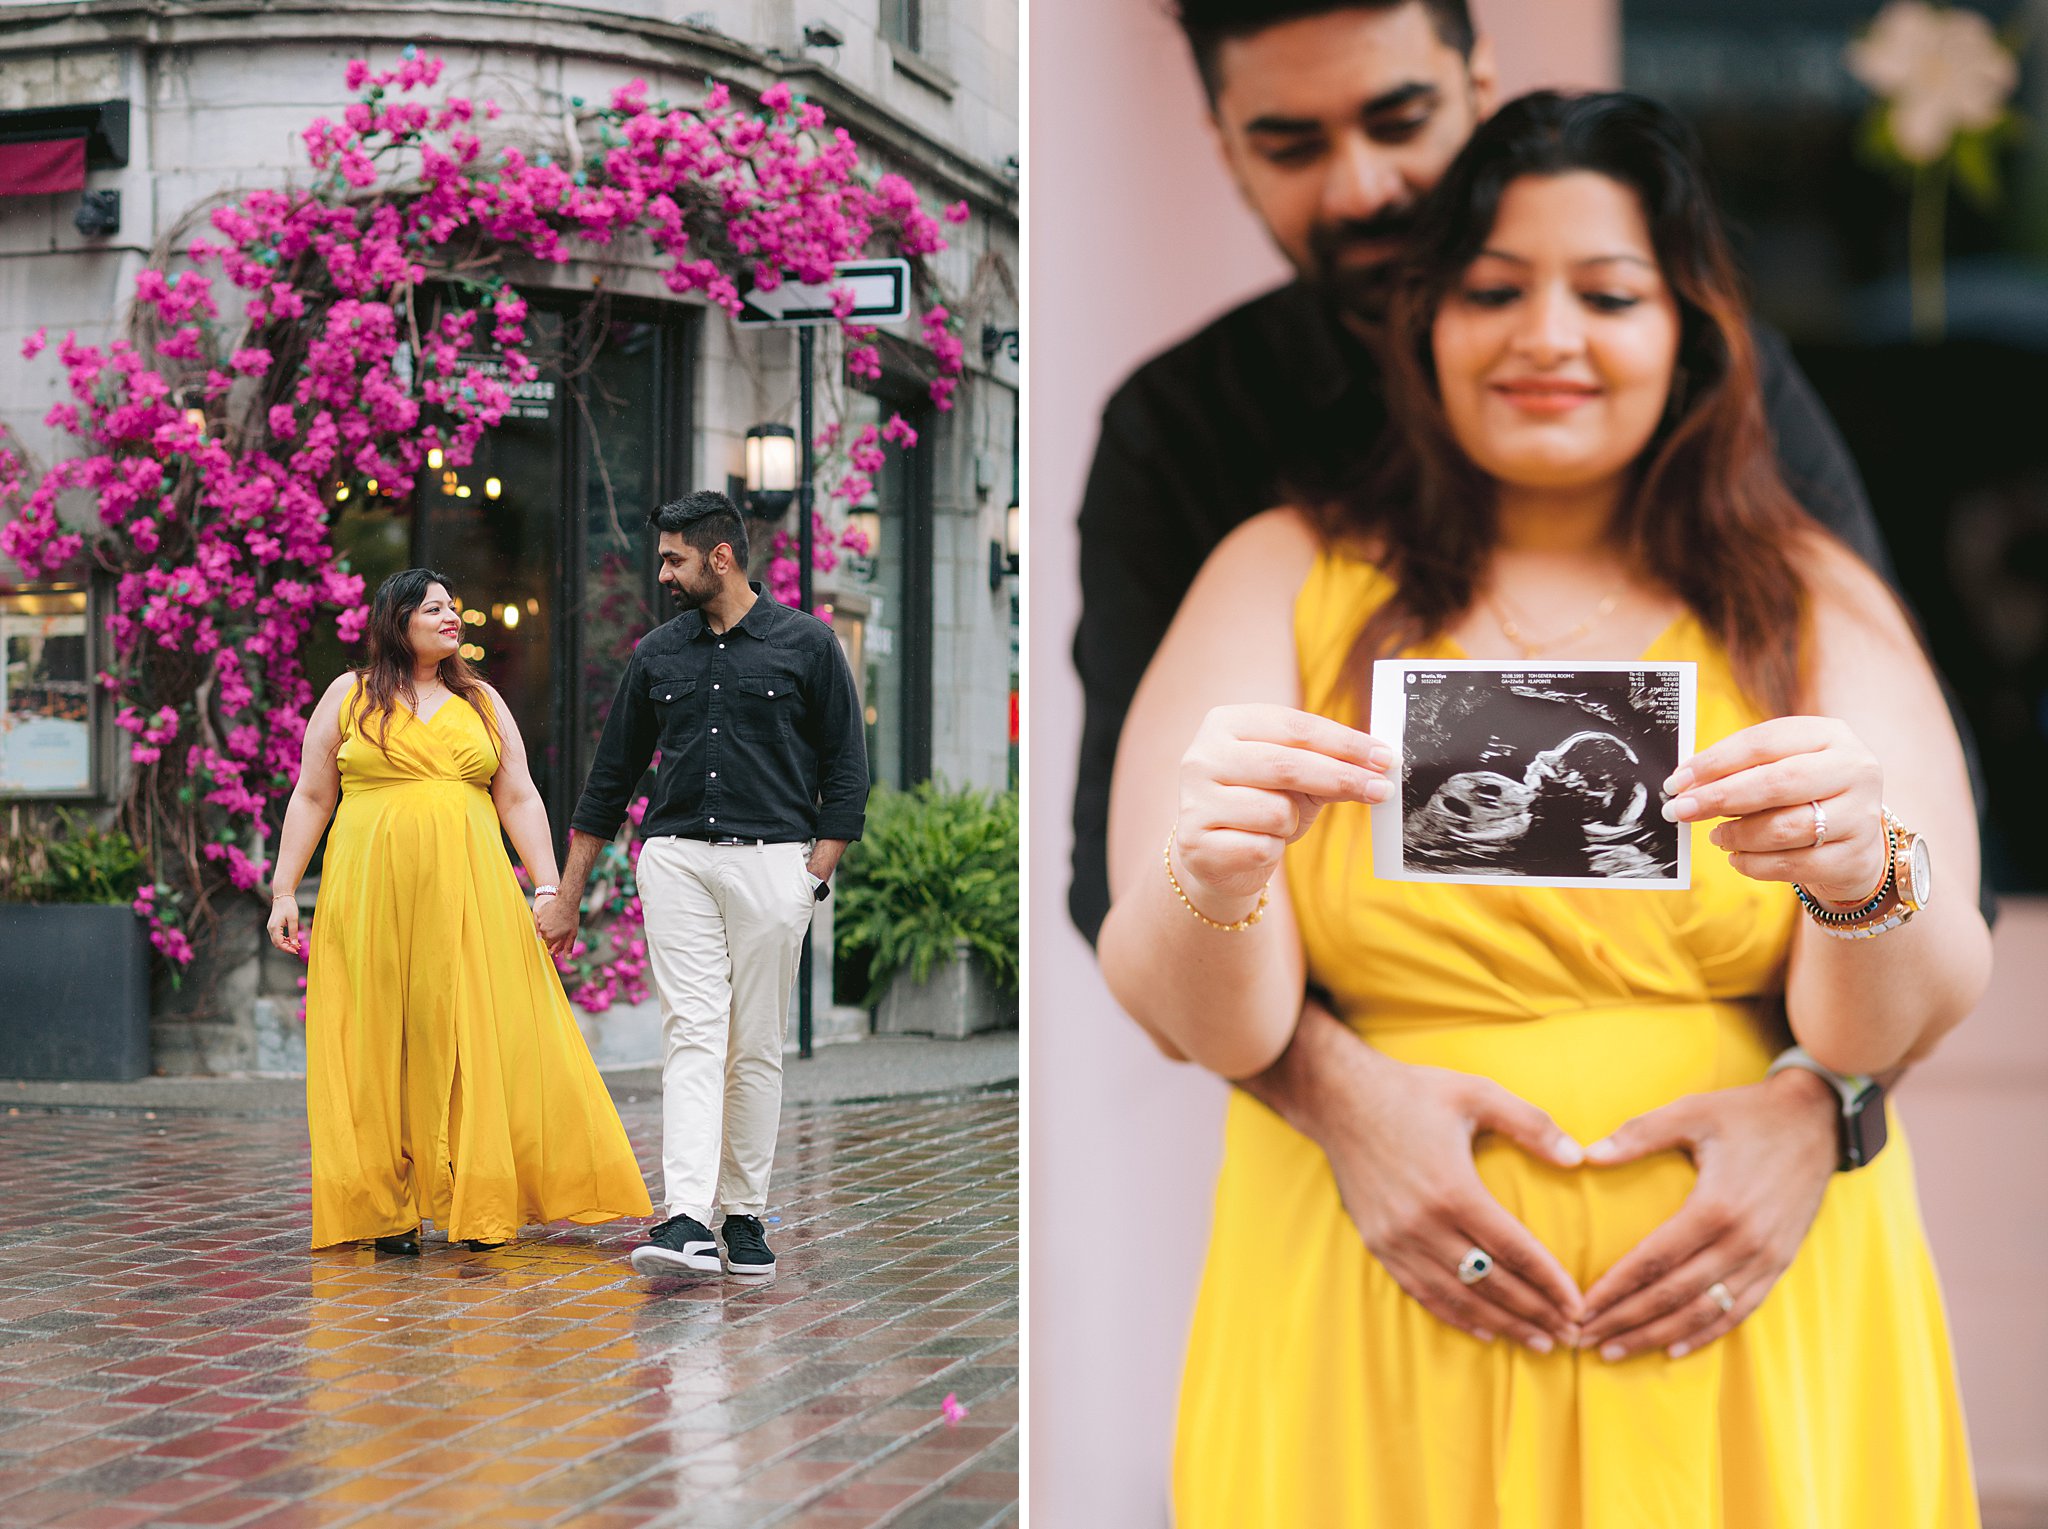 Embracing parenthood: A couple's maternity photoshoot set against the picturesque Old Port neighborhood in Montreal.